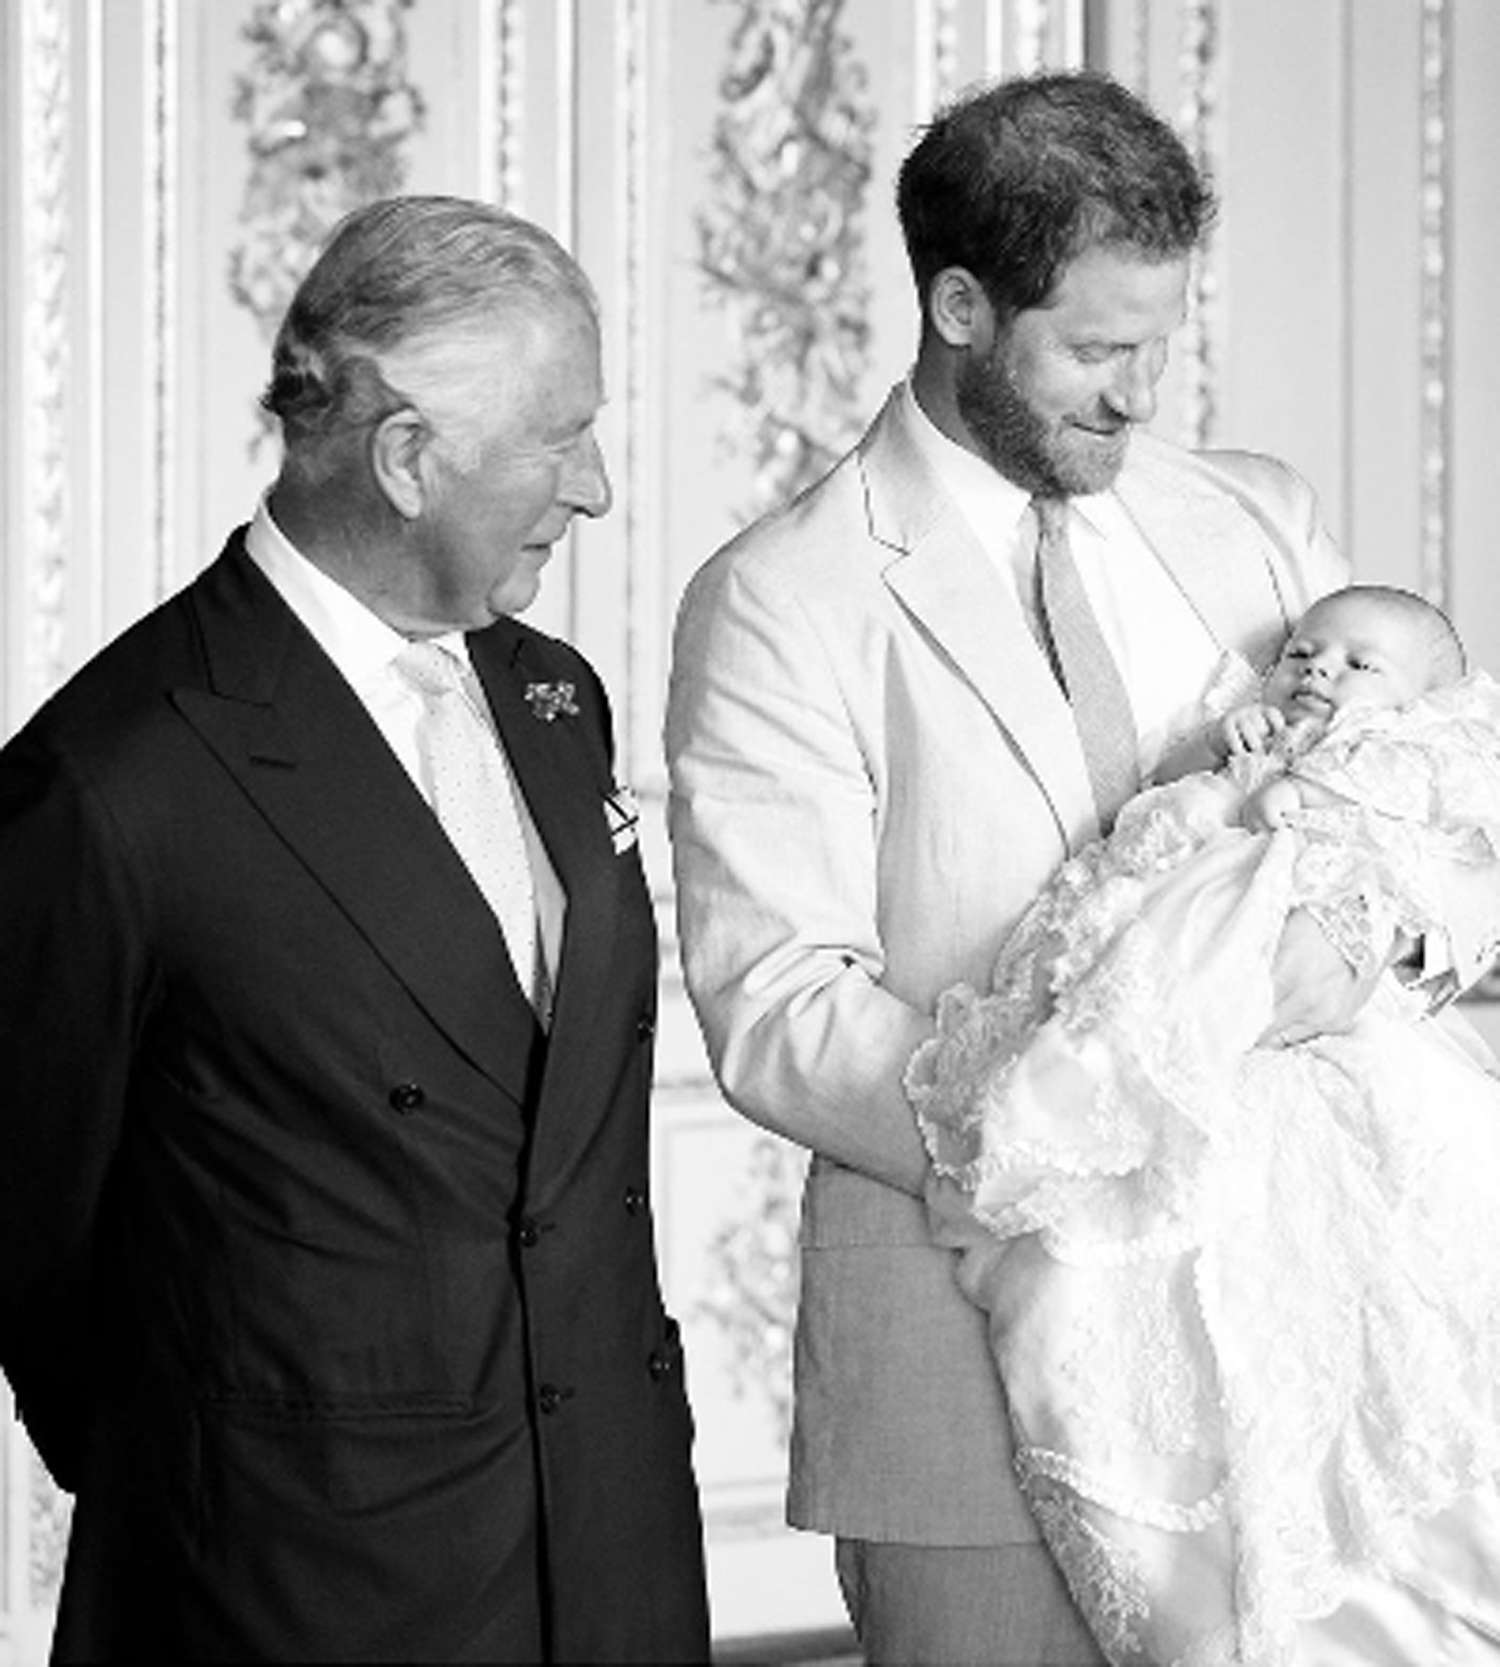 Prince Charles, Prince of Wales, Prince Harry, Duke of Sussex, Archie Harrison Mountbatten-Windsor